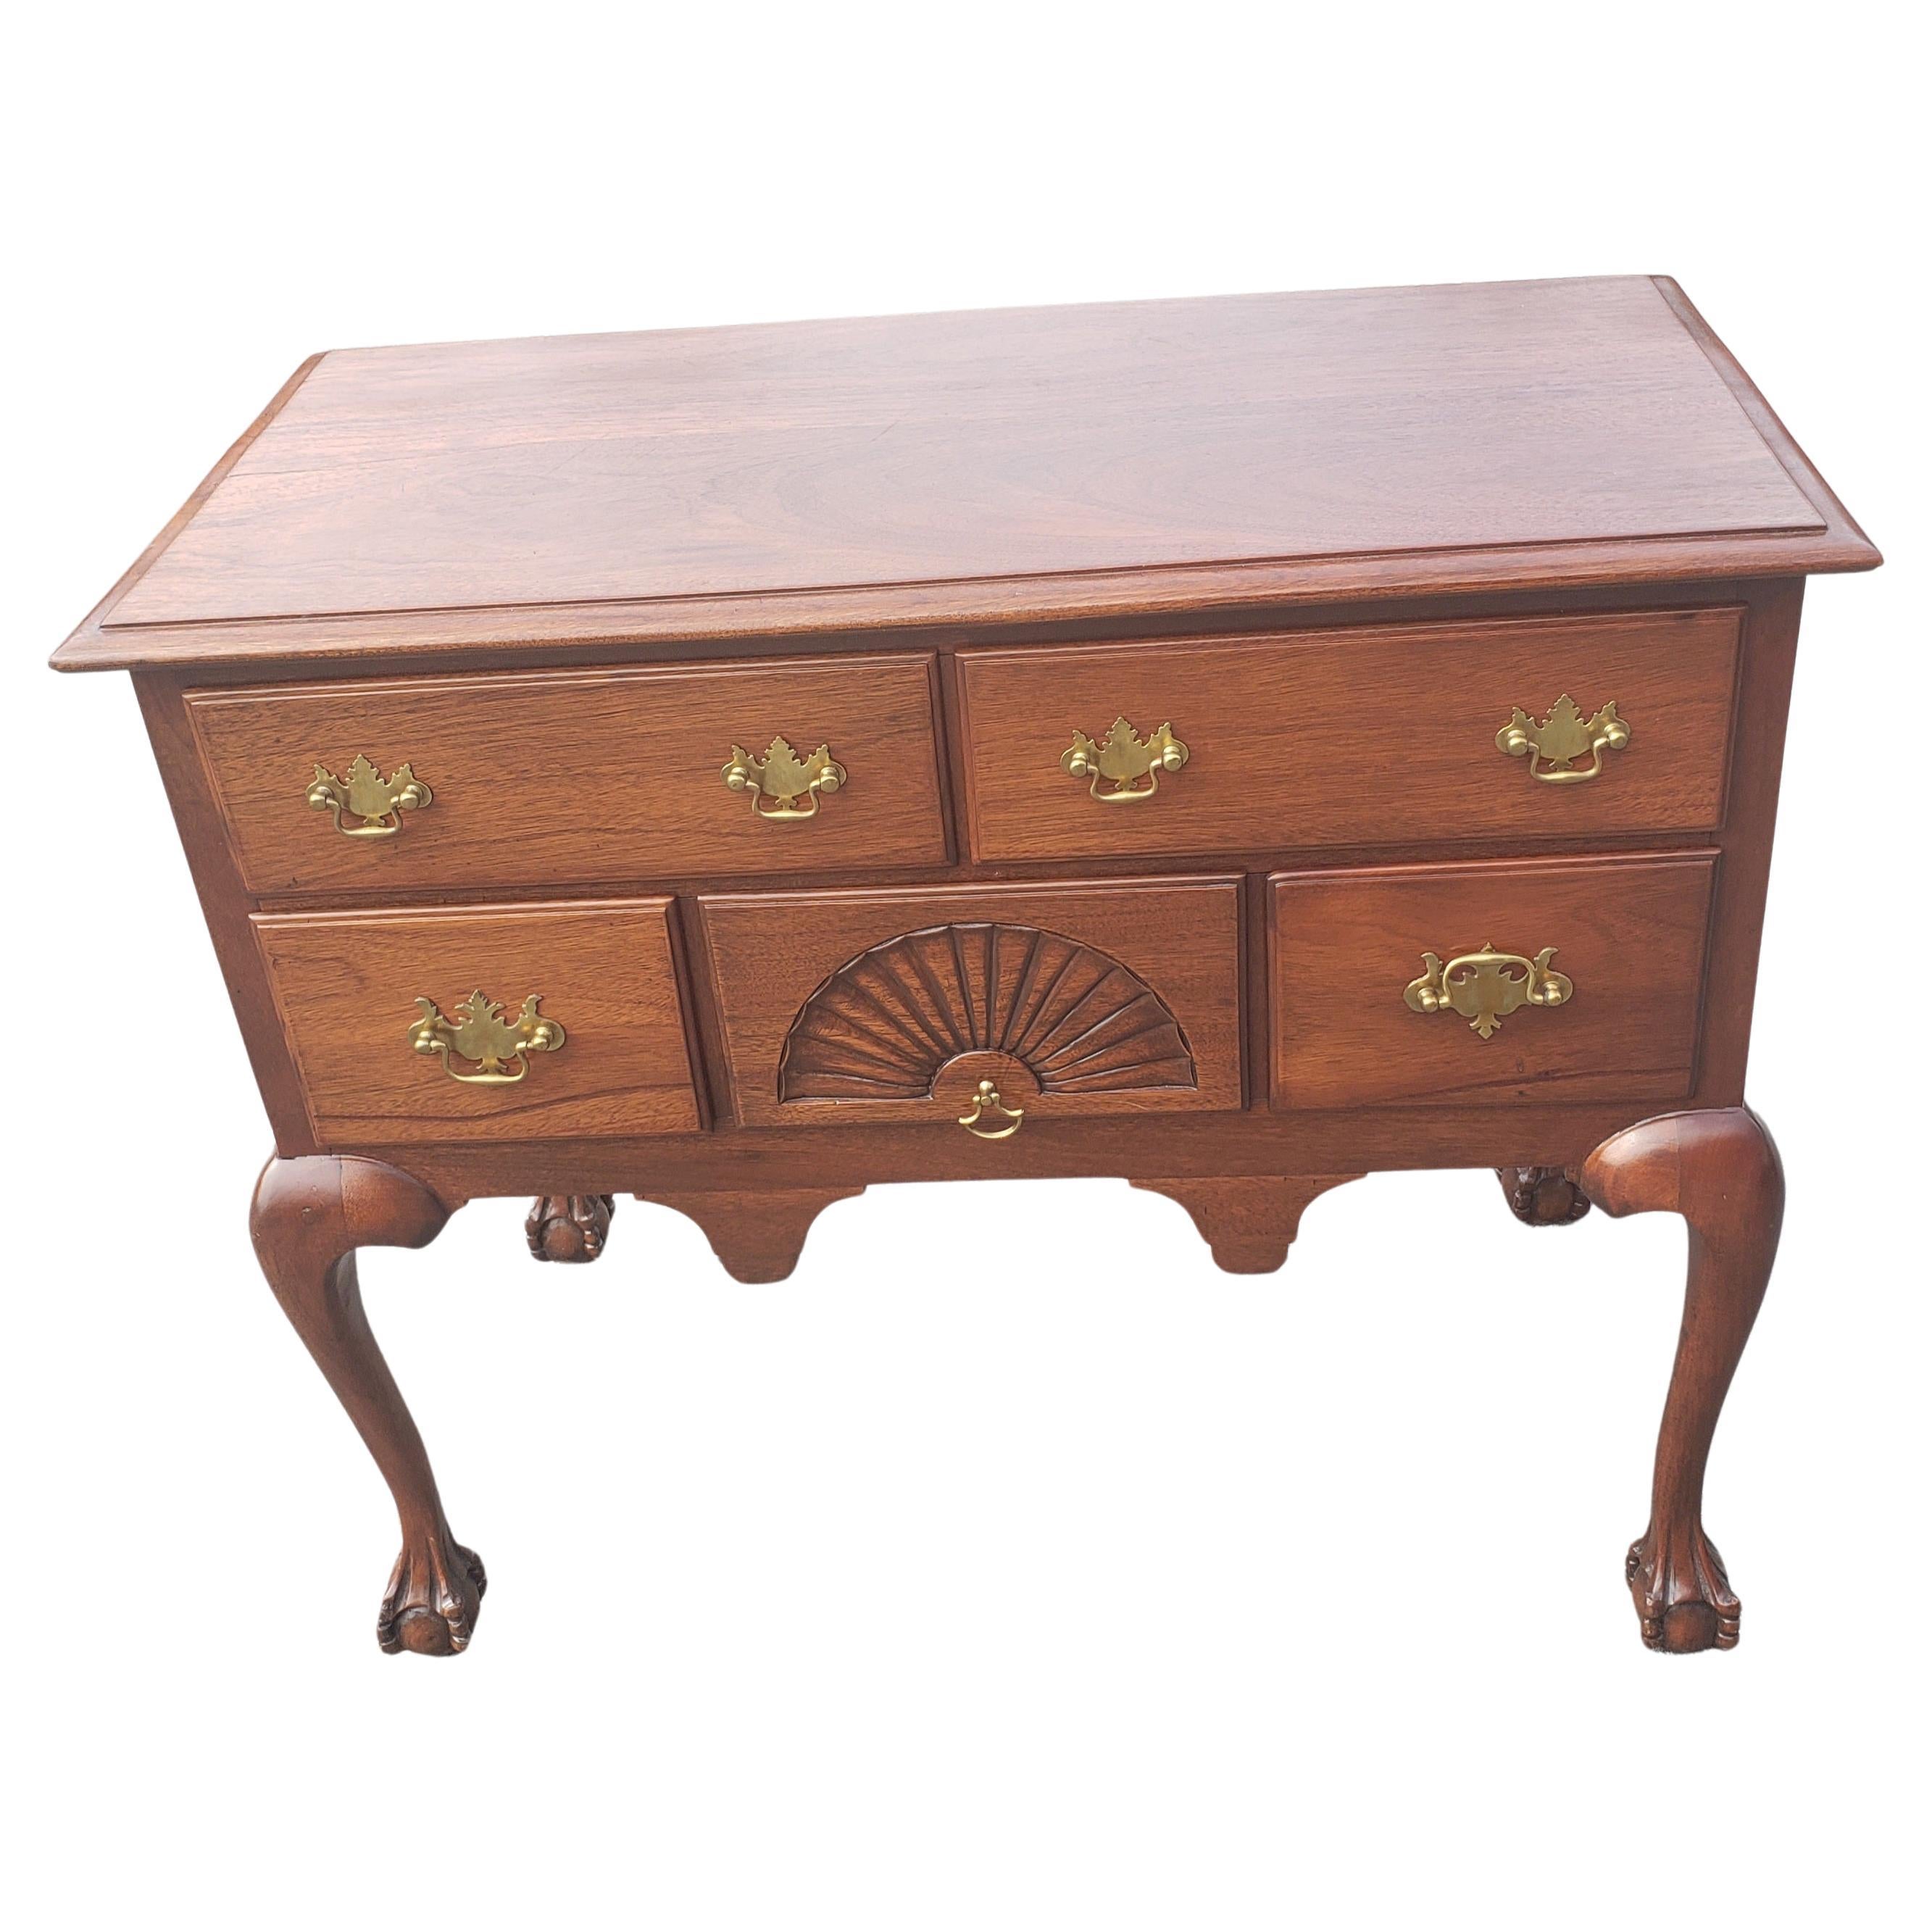 Late 19th Century Chippendale Mahogany Lowboy with Ball and Claw Feet For Sale 2